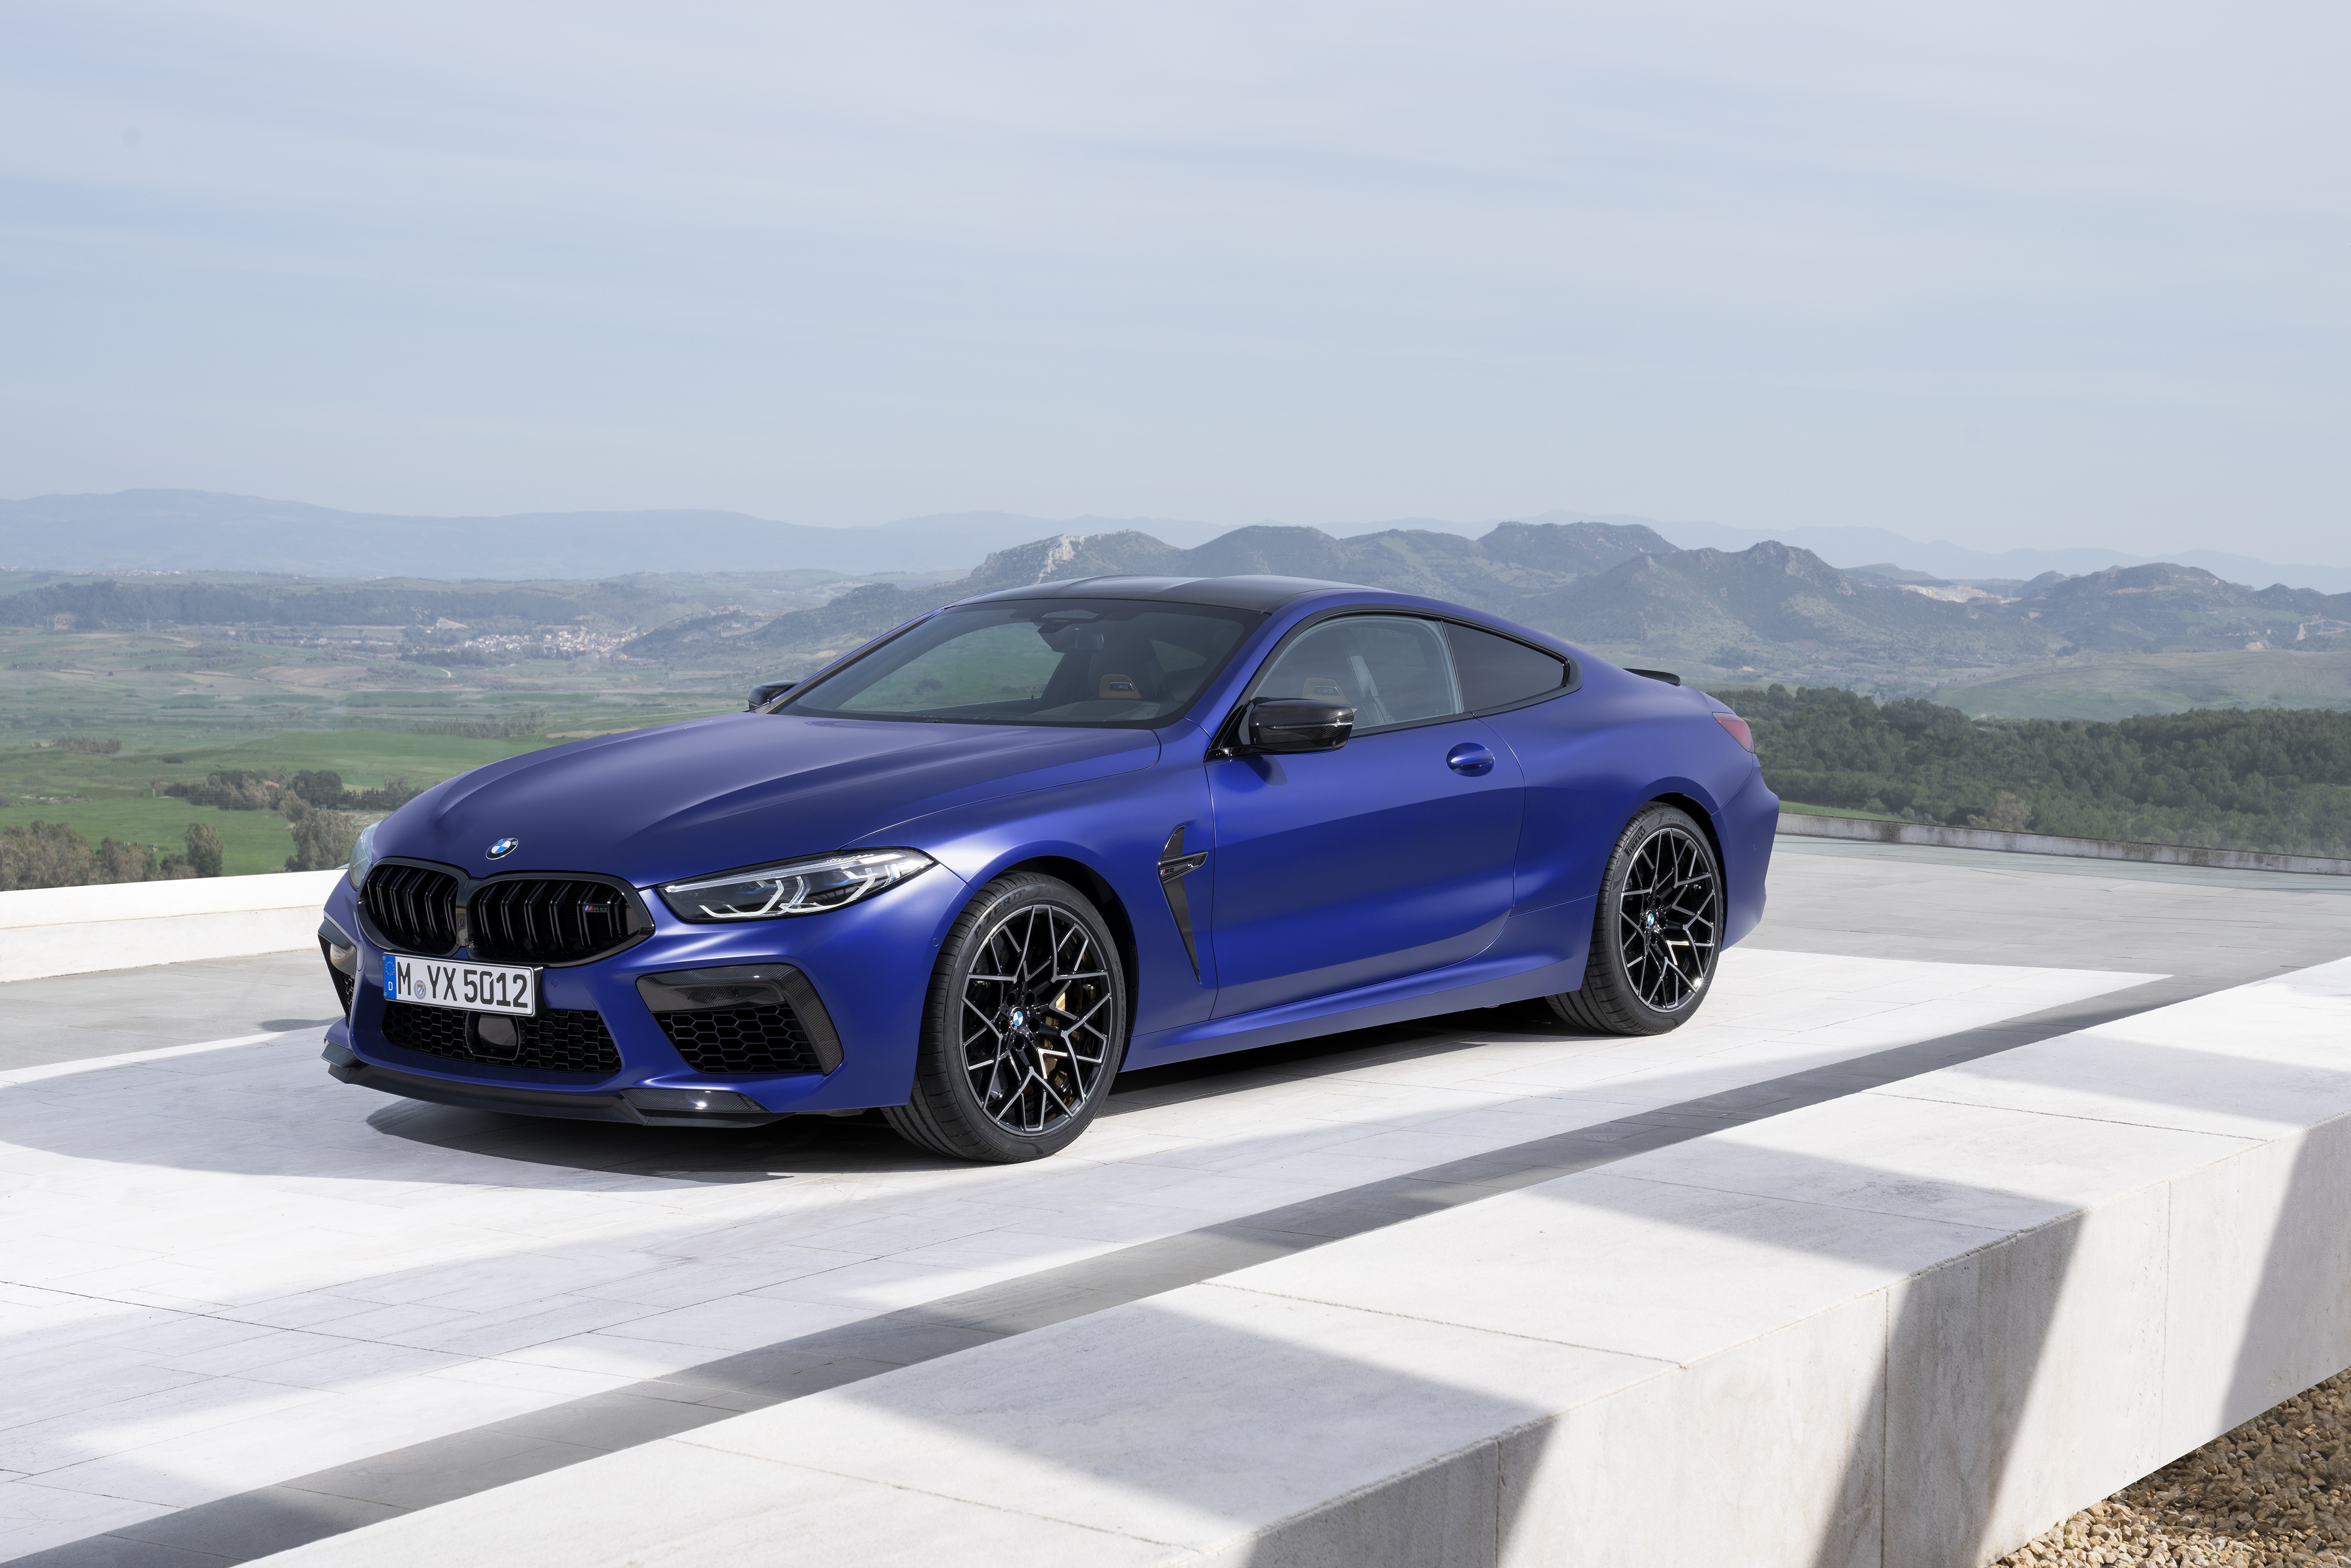 M 8 competition. БМВ м8 ф92. BMW m8 Coupe. BMW m8 Competition Coupe 2020. BMW m8 2019.